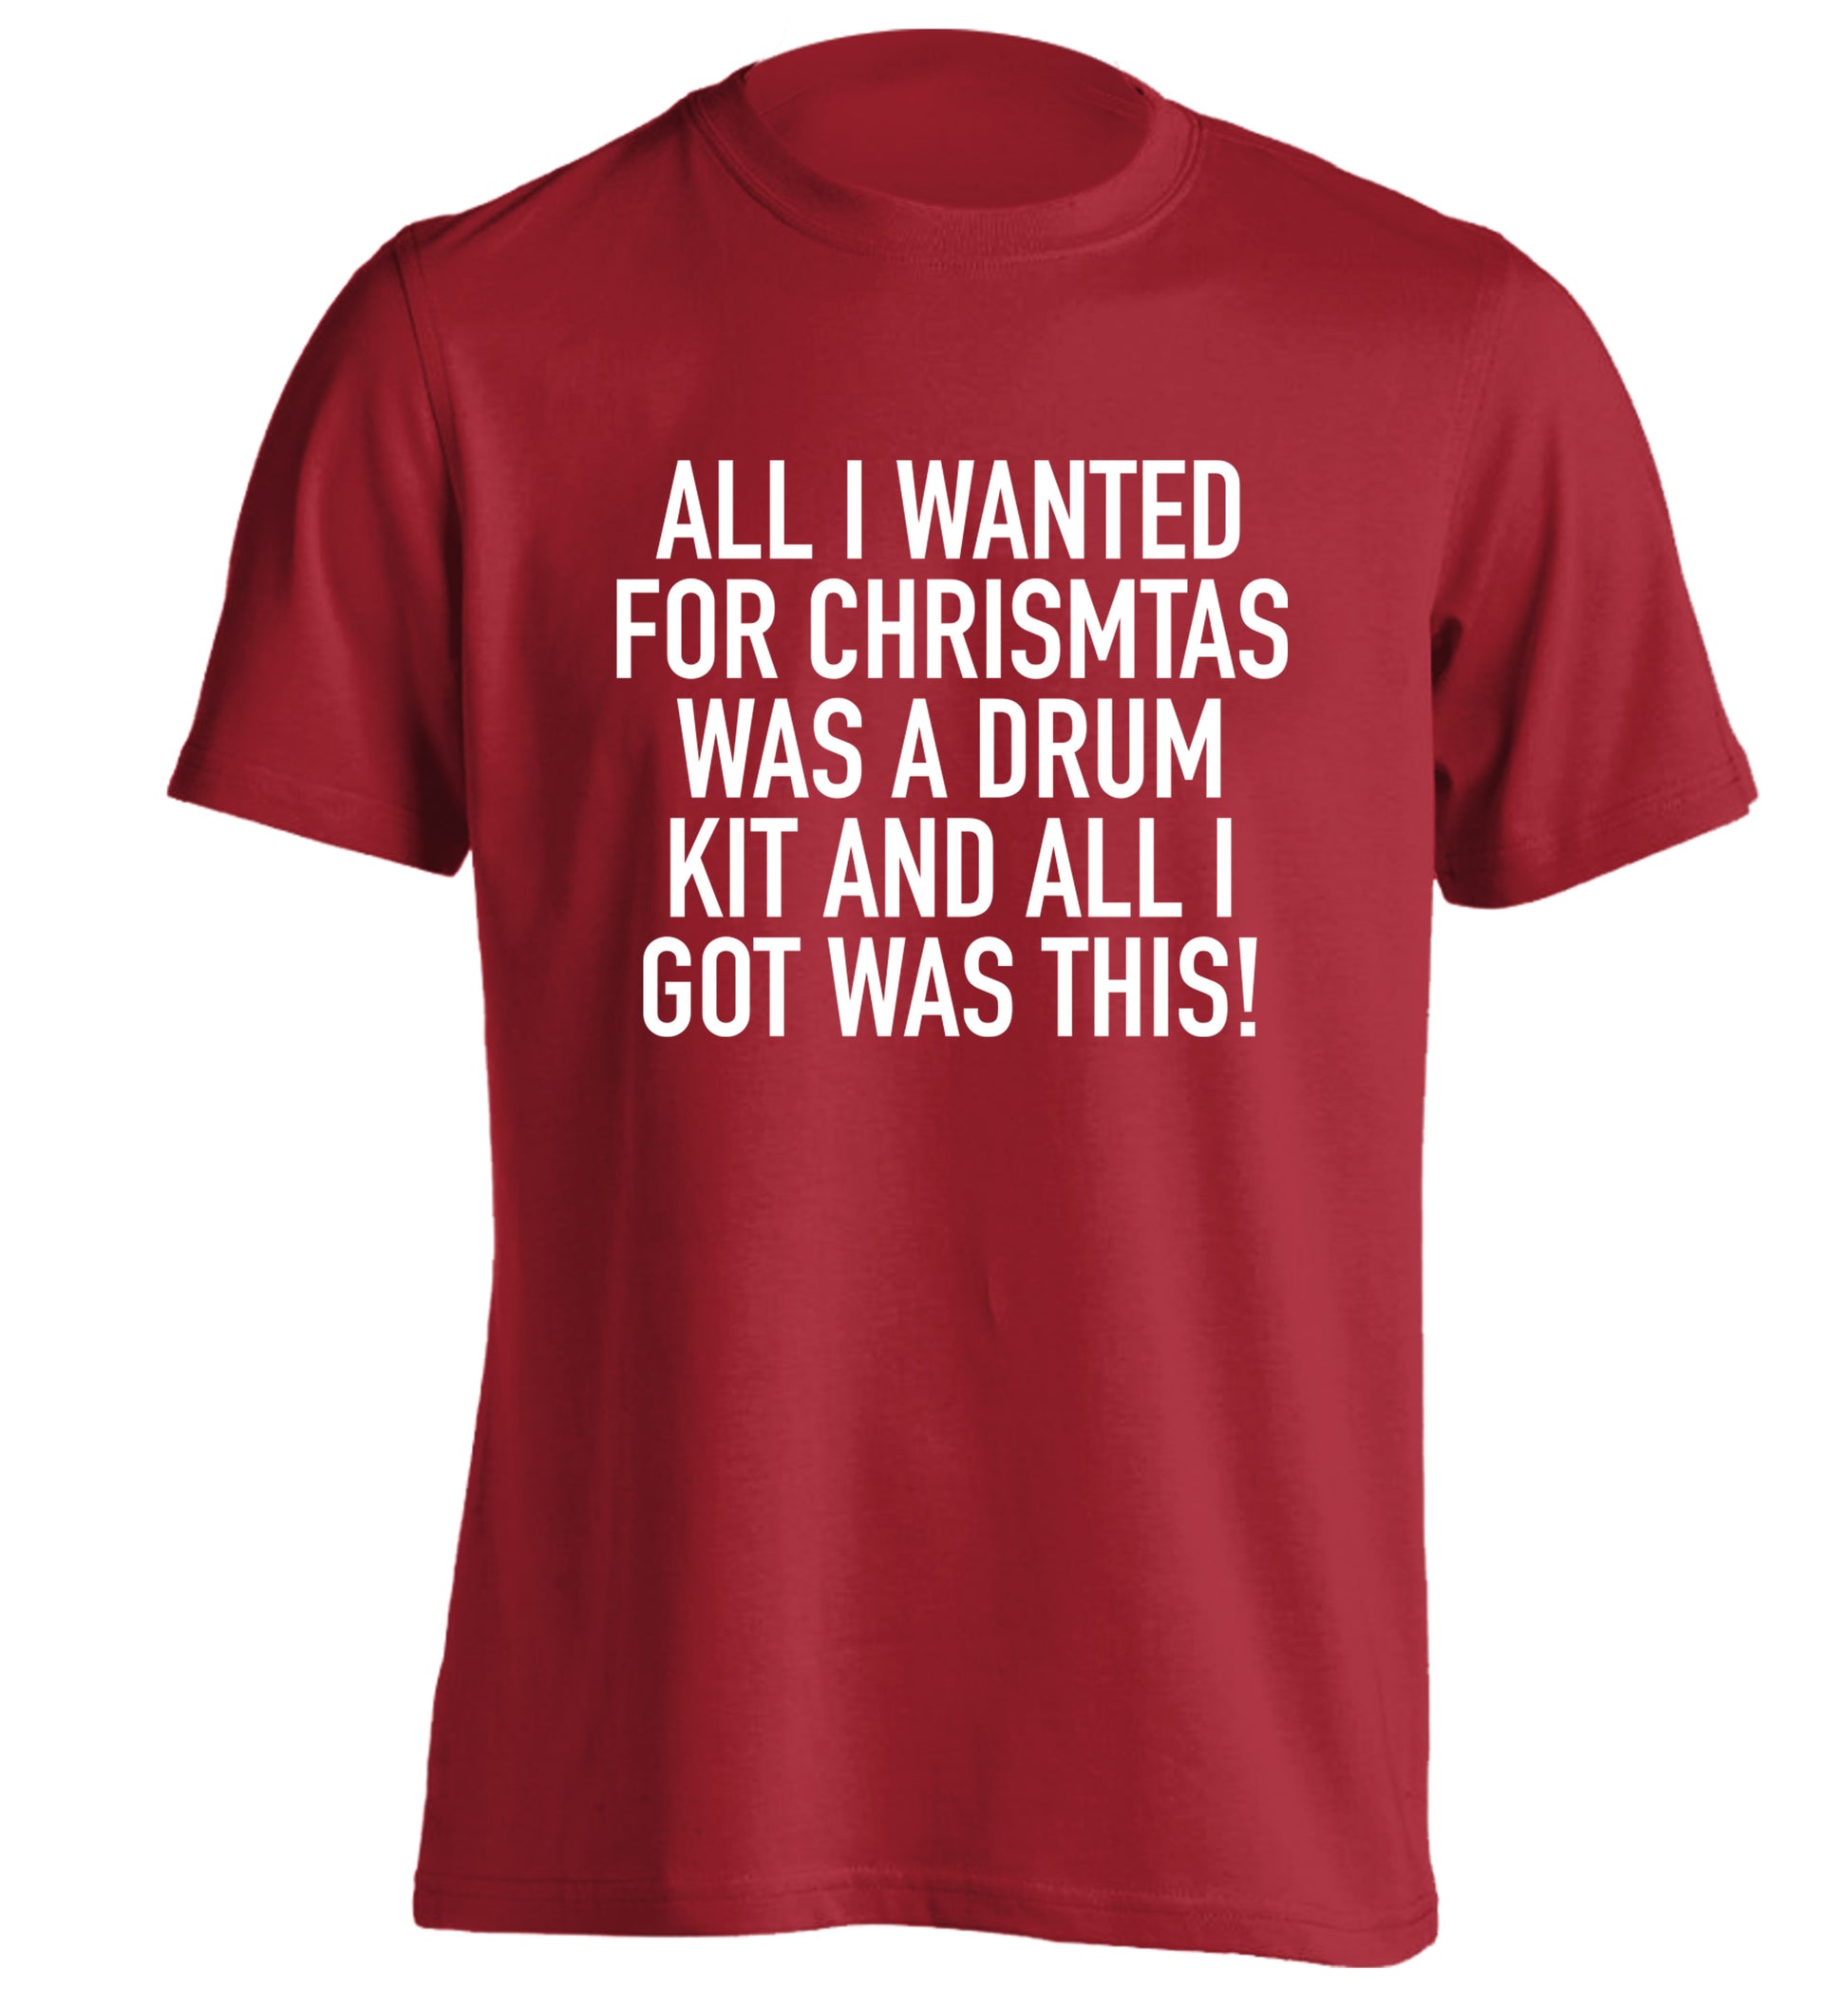 All I wanted for Christmas was a drum kit and all I got was this! adults unisex red Tshirt 2XL